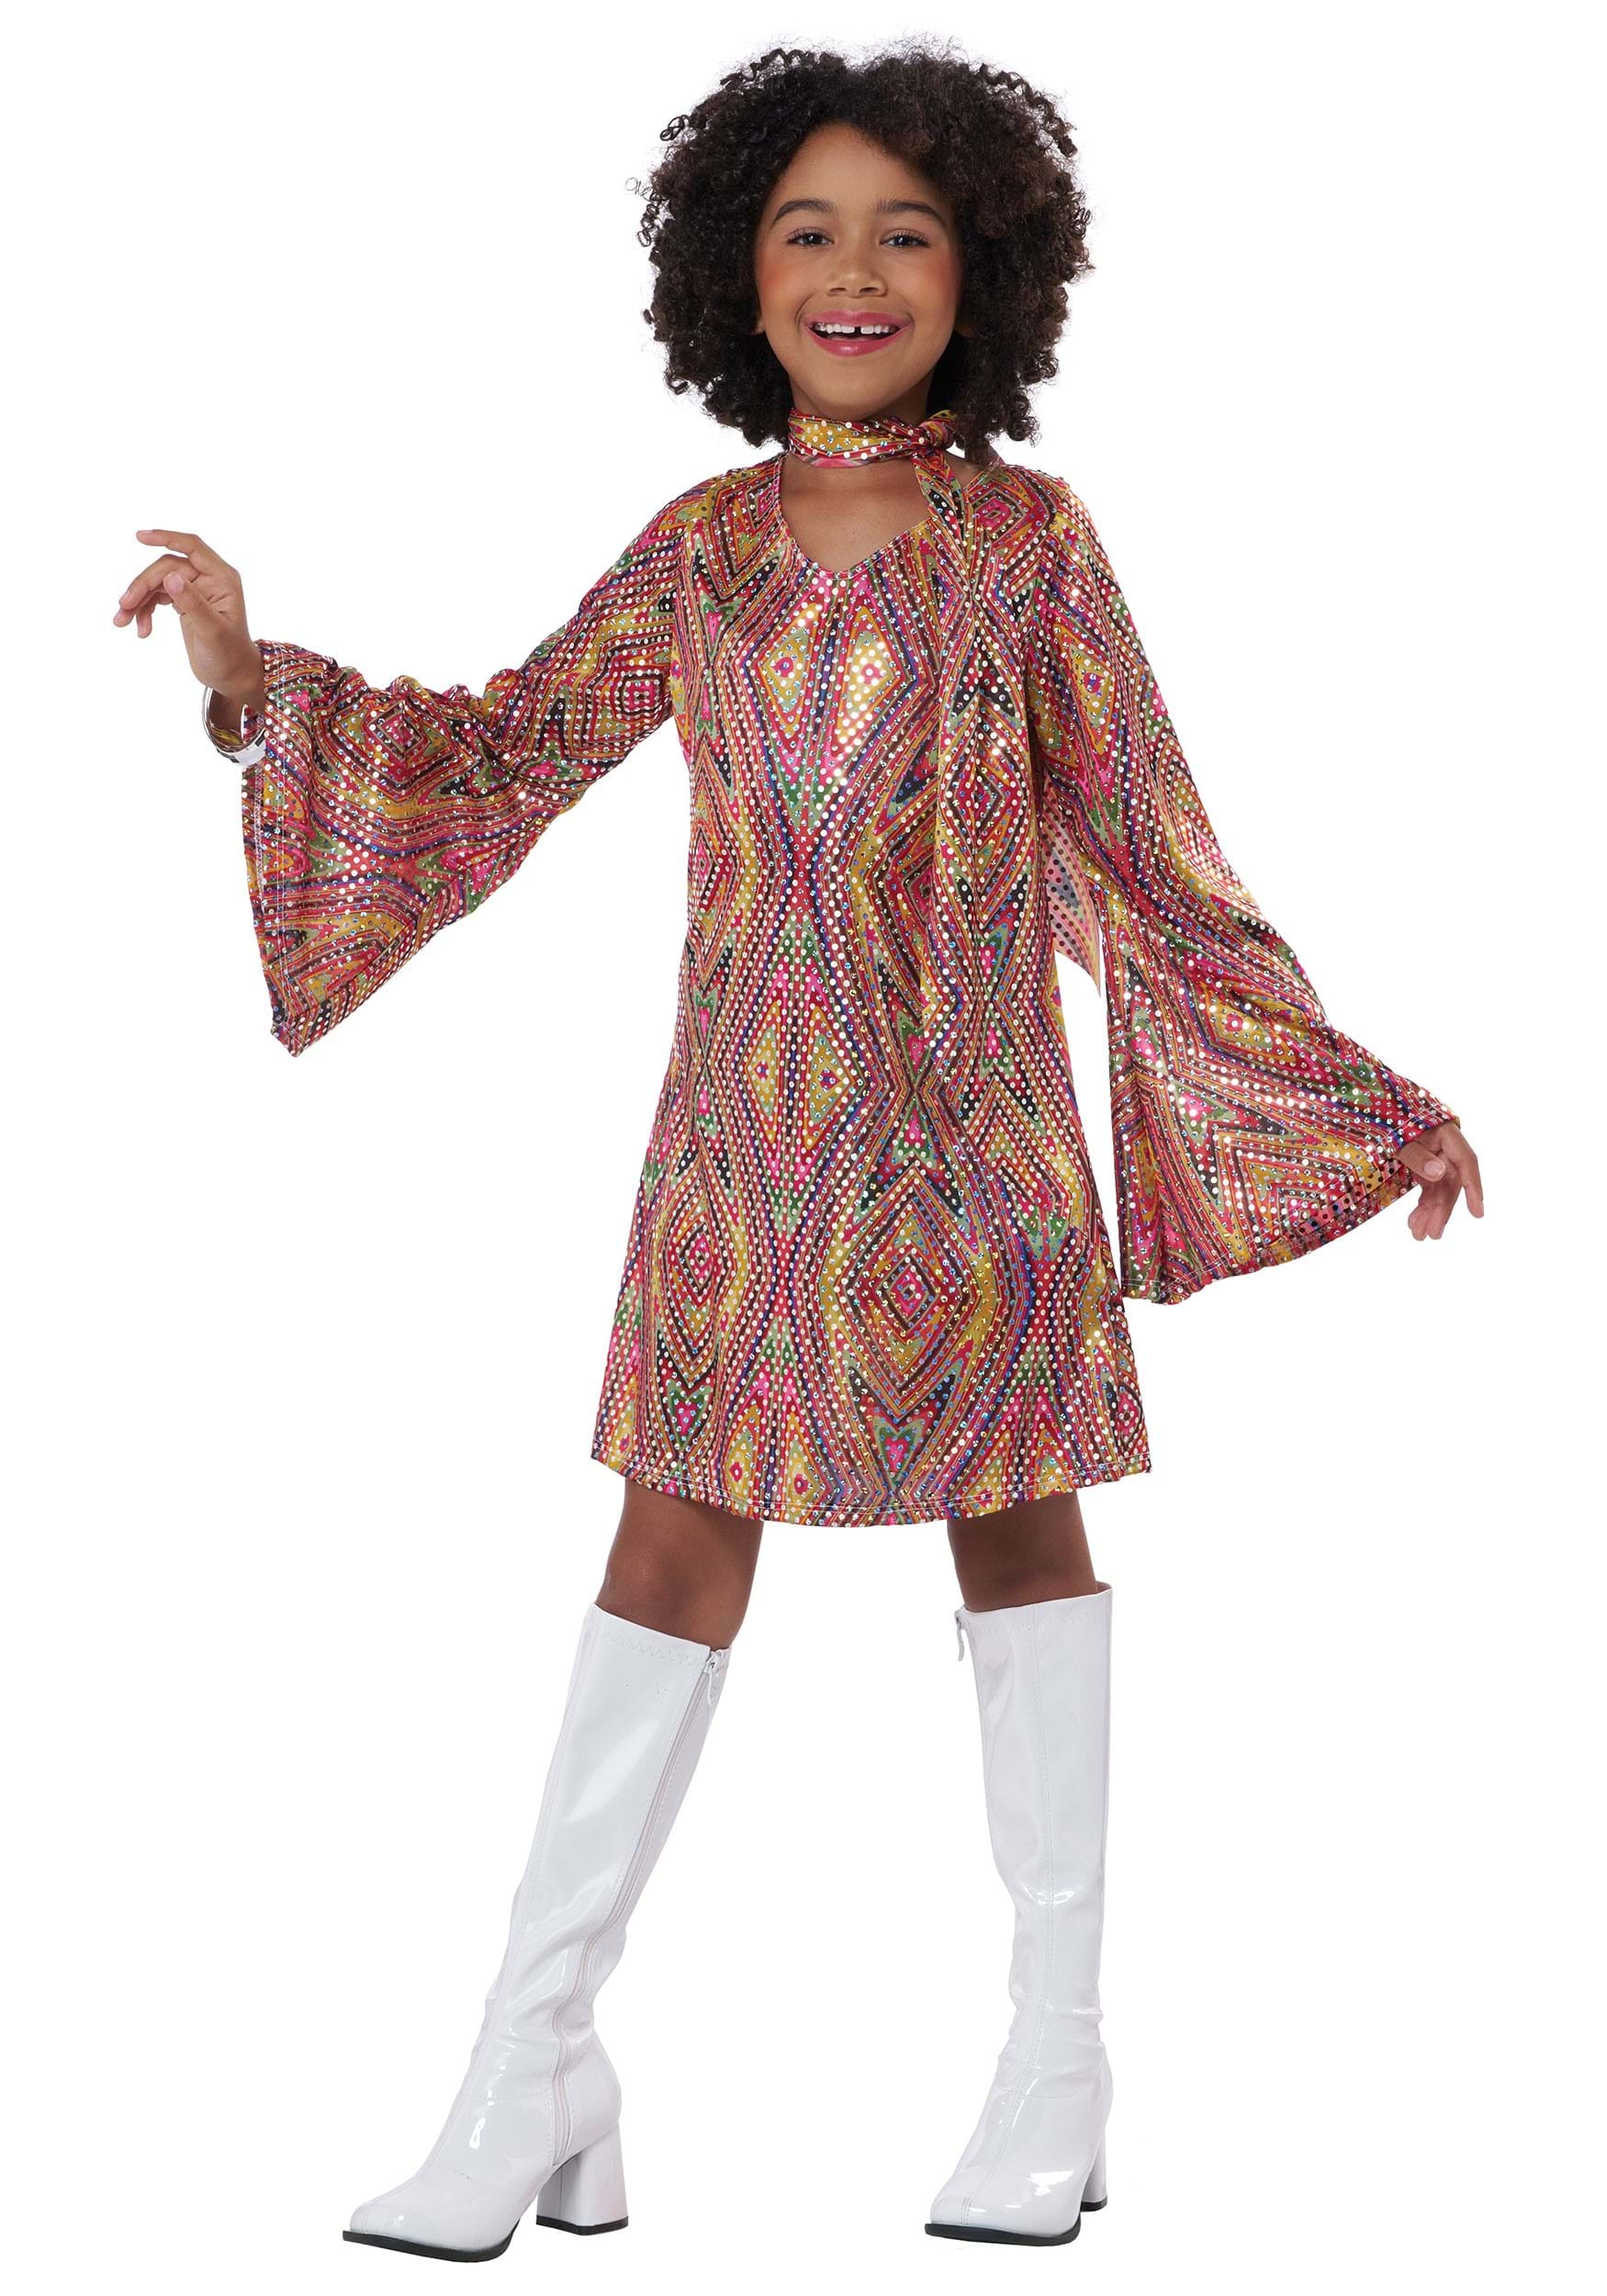 Groovy One Outfit/ Bell Bottom, Leggings Kids Outfit, Bell Bottoms, Groovy  Outfit, Kids Bell Bottom, Kids Groovy Outfit 